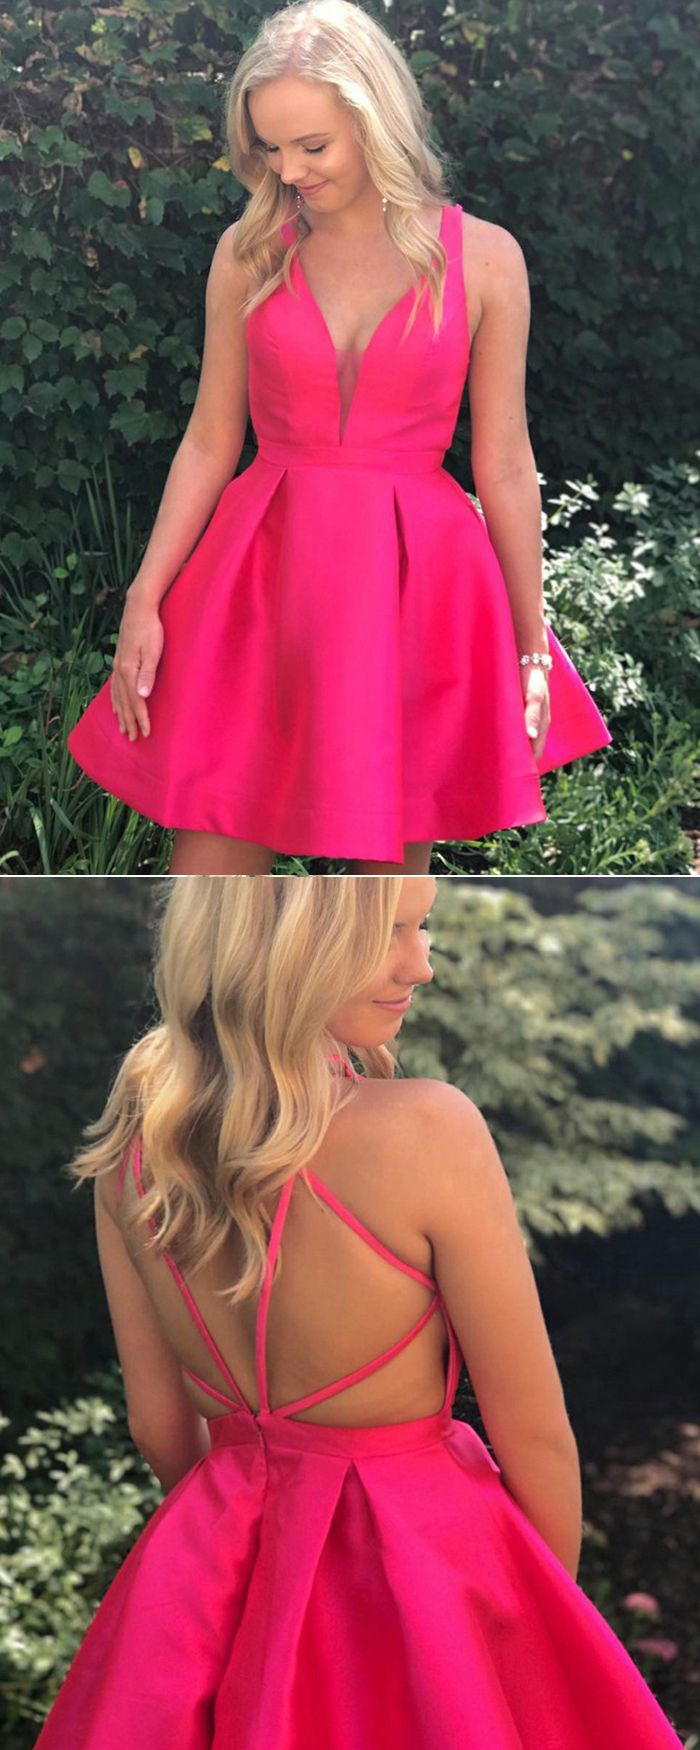 PM190,Simple Hot Pink Satin Homecoming Dresses